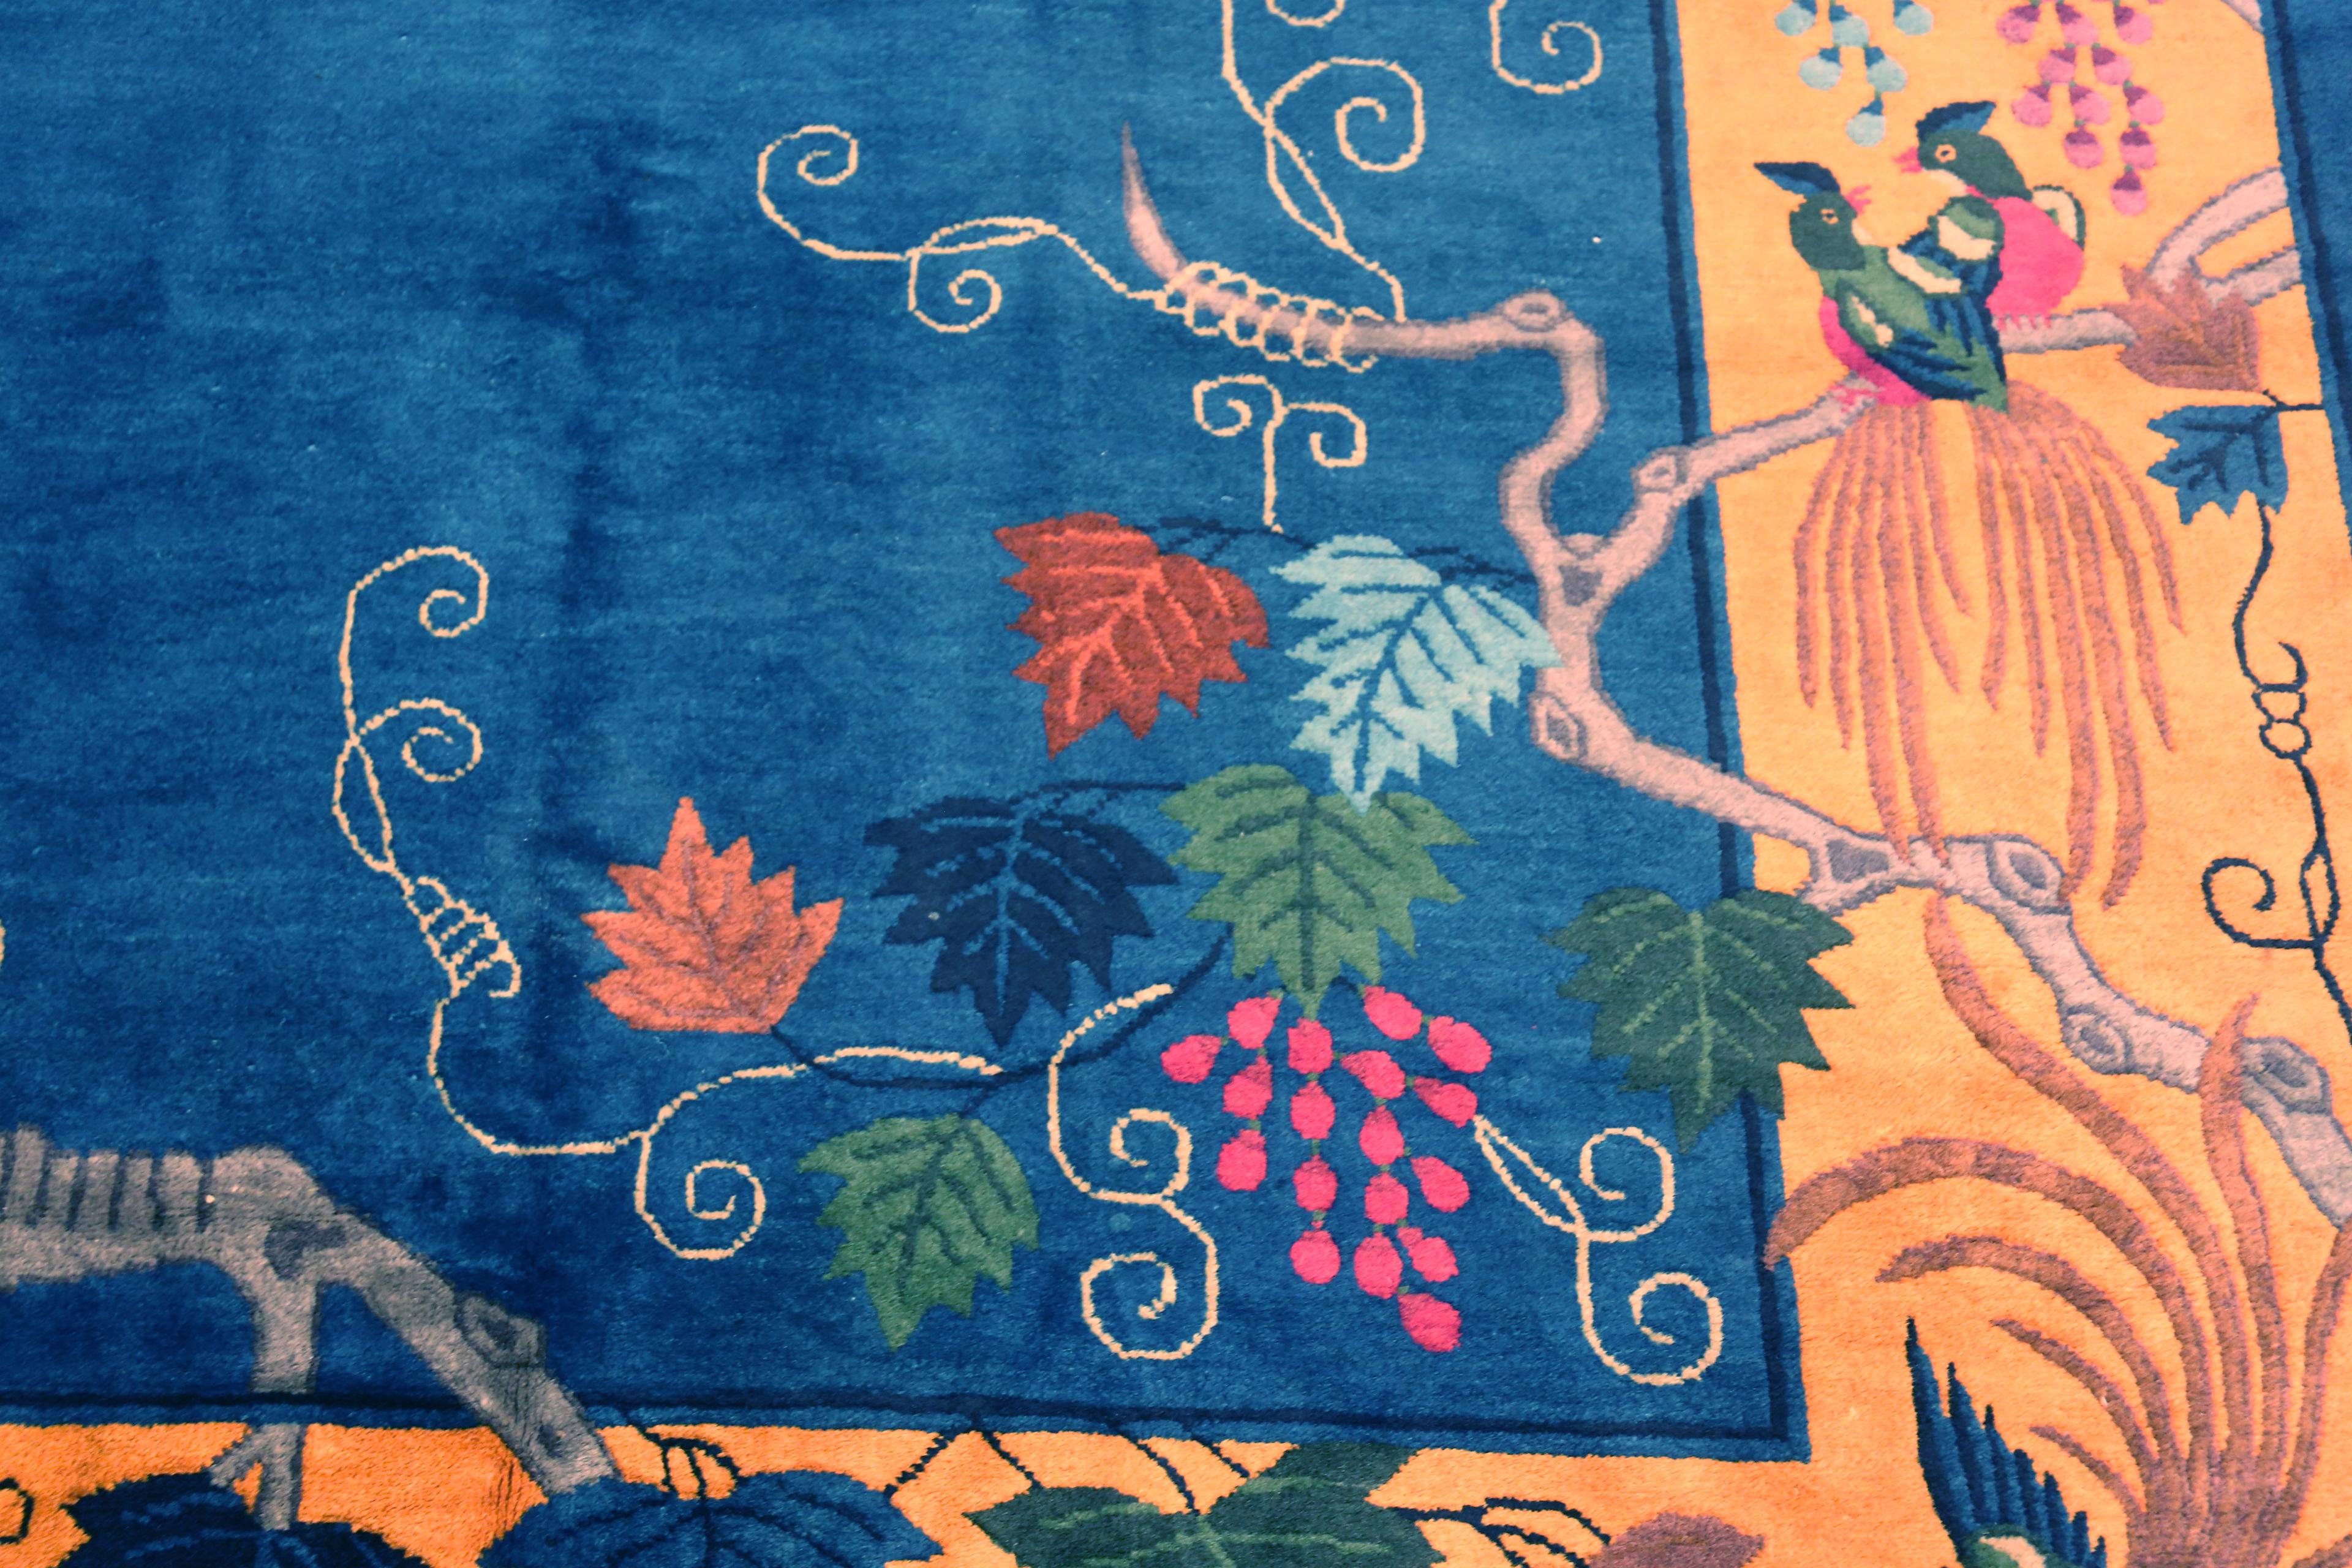 Eclectic Colorful Antique Chinese Art Deco Peacock Rug 10' x 12'1